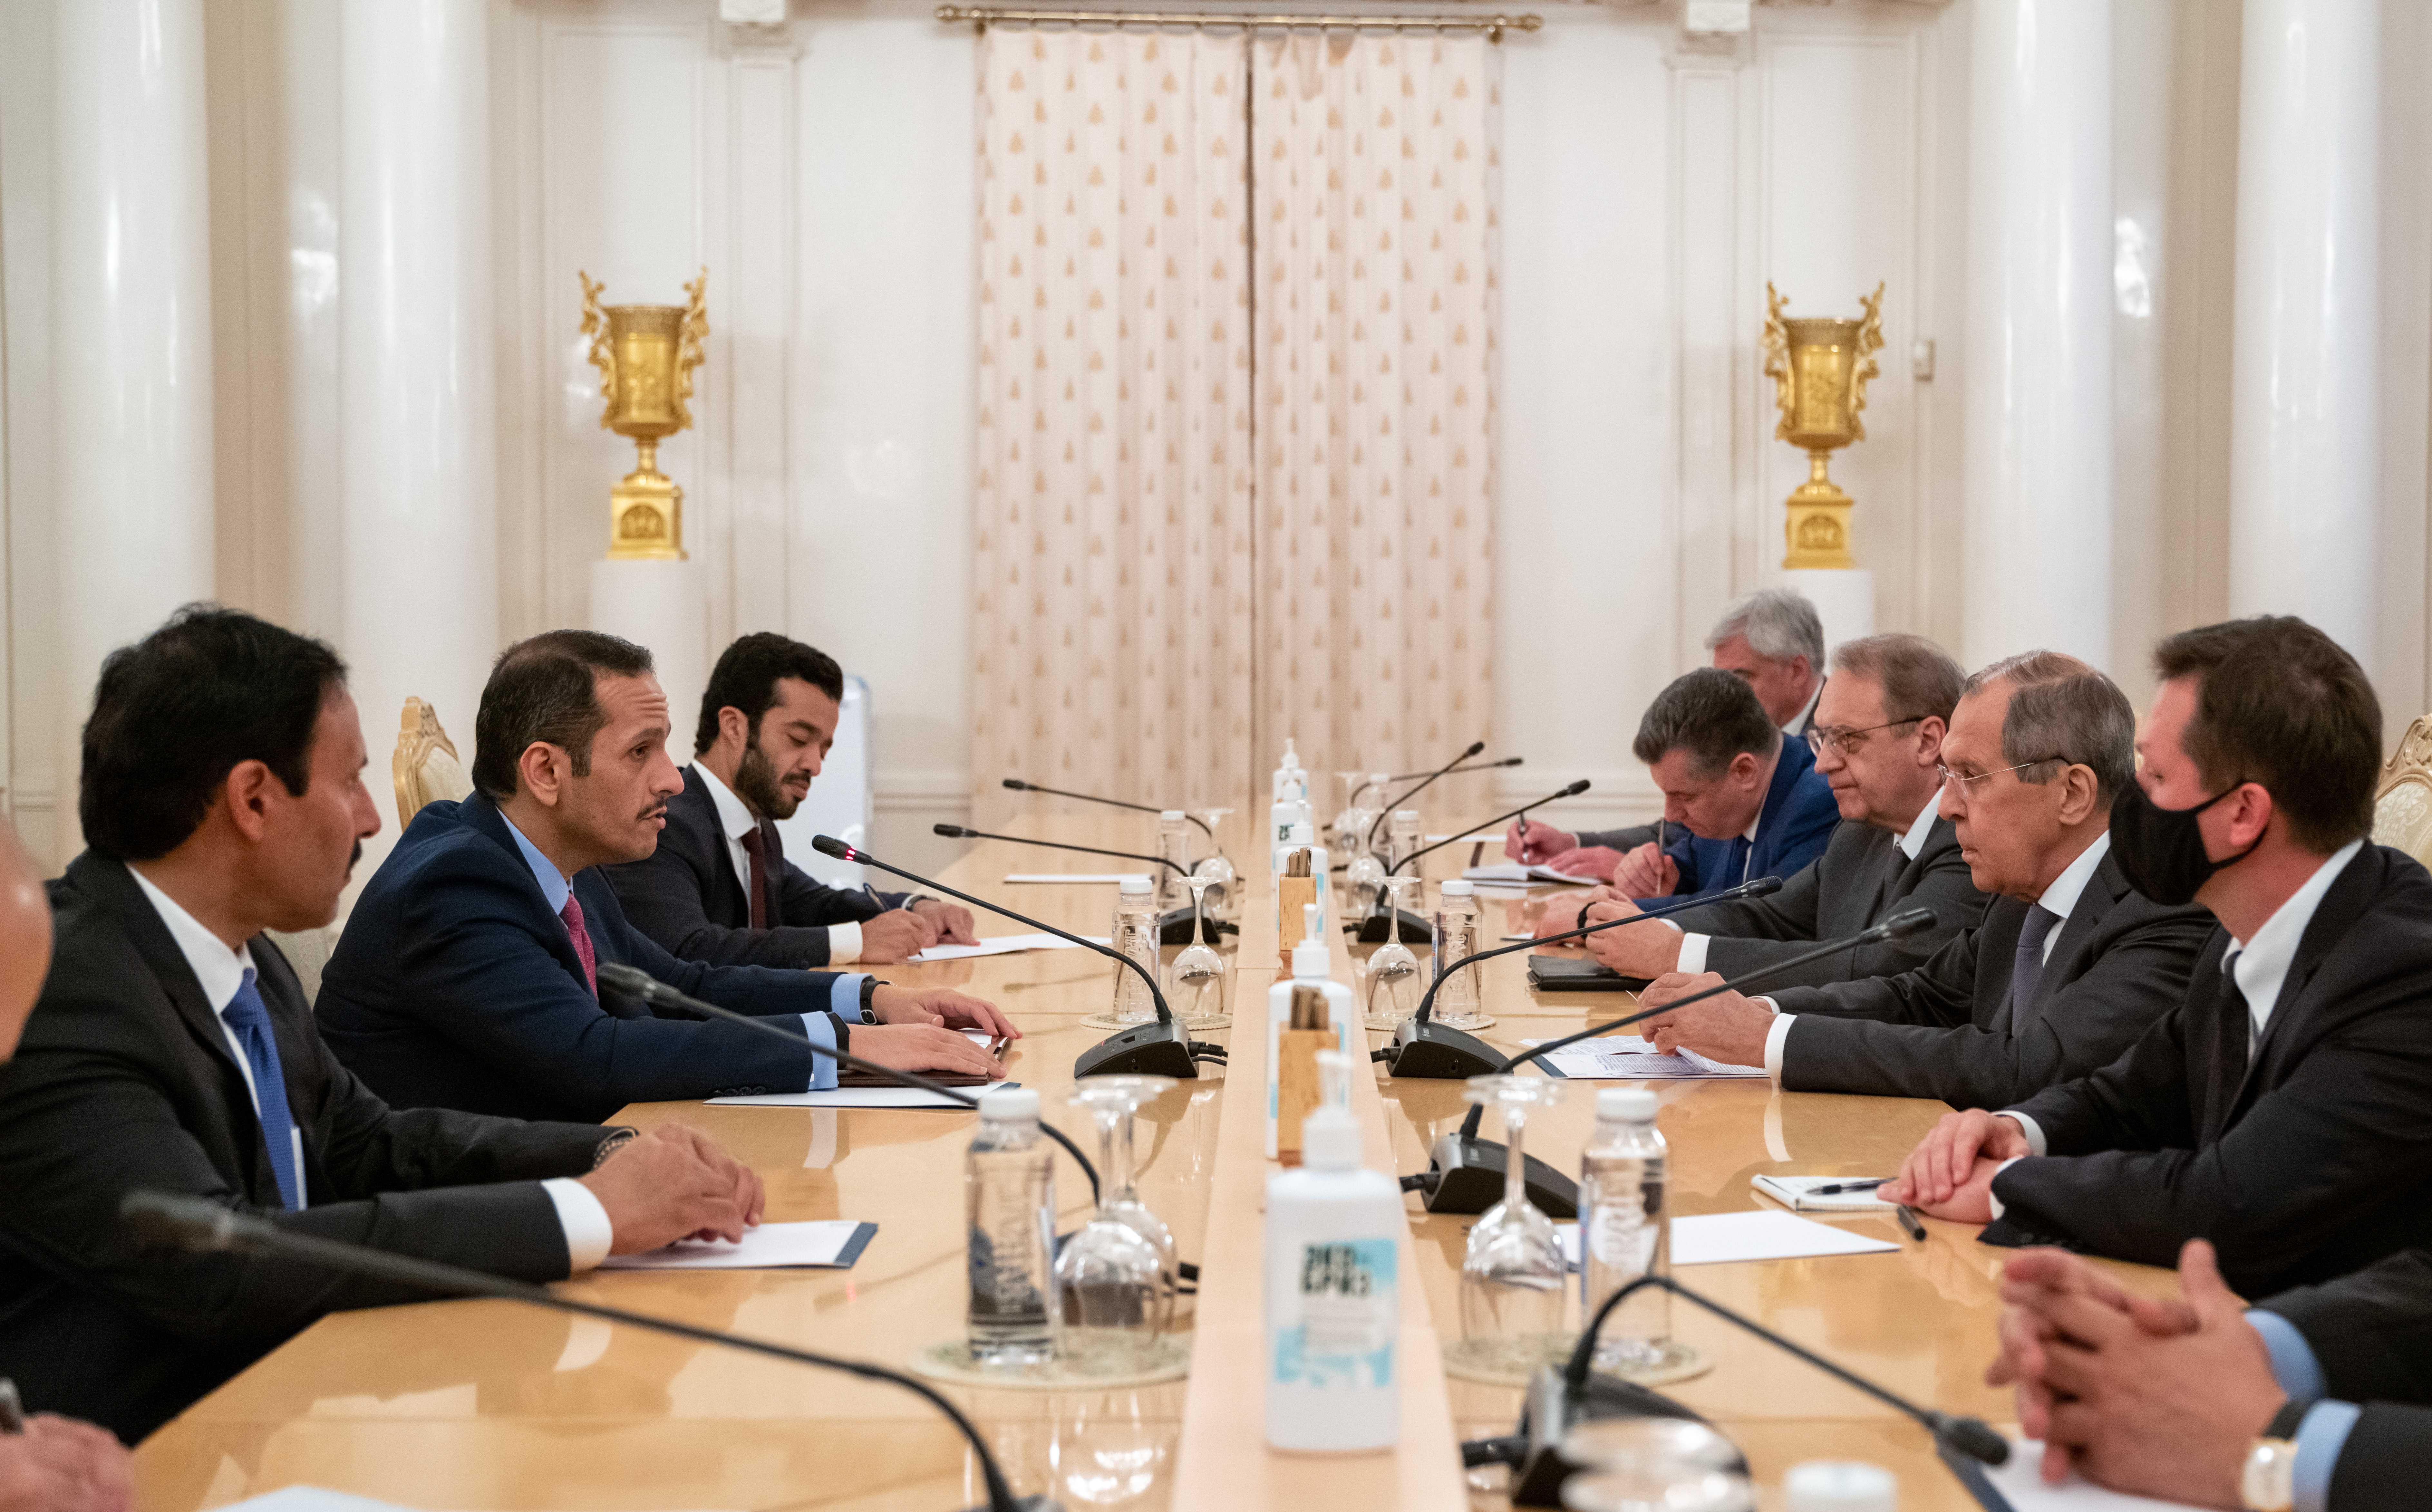 Deputy Prime Minister and Minister of Foreign Affairs Meets Russian Foreign Minister